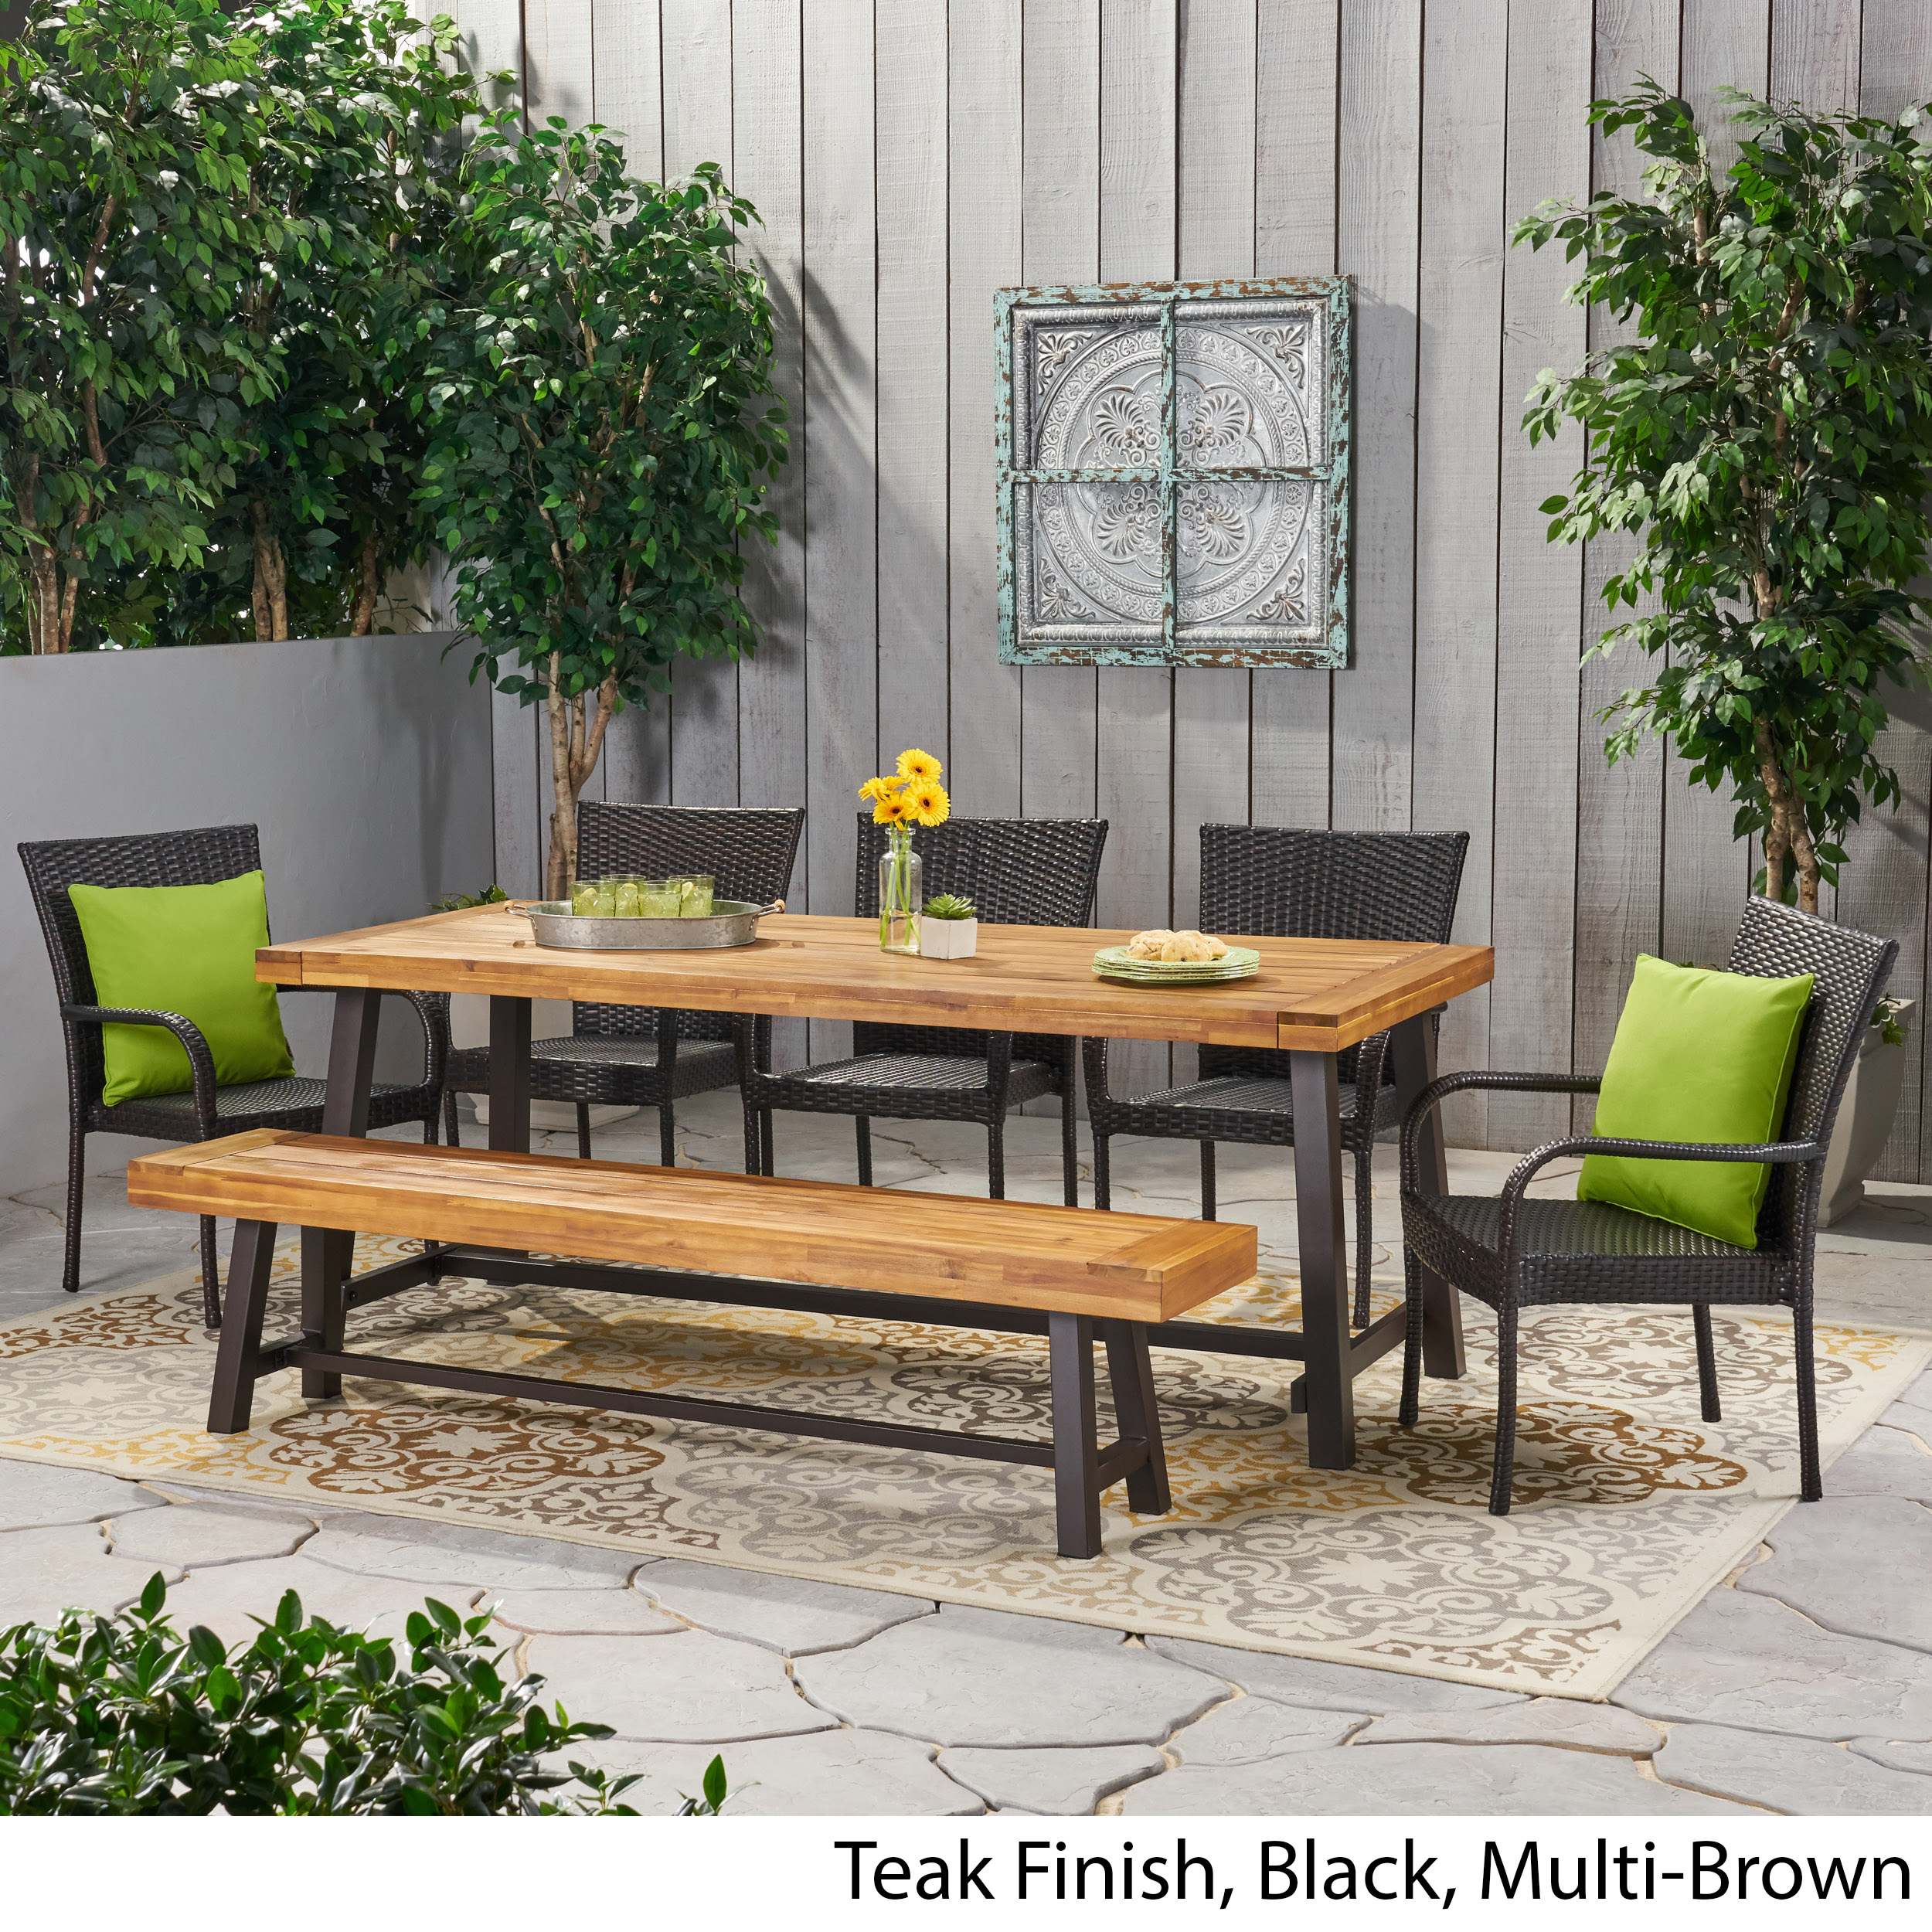 Logan Outdoor Rustic Acacia Wood 8 Seater Dining Set with Dining Bench, Teak, Black and Multi-Brown - image 2 of 10